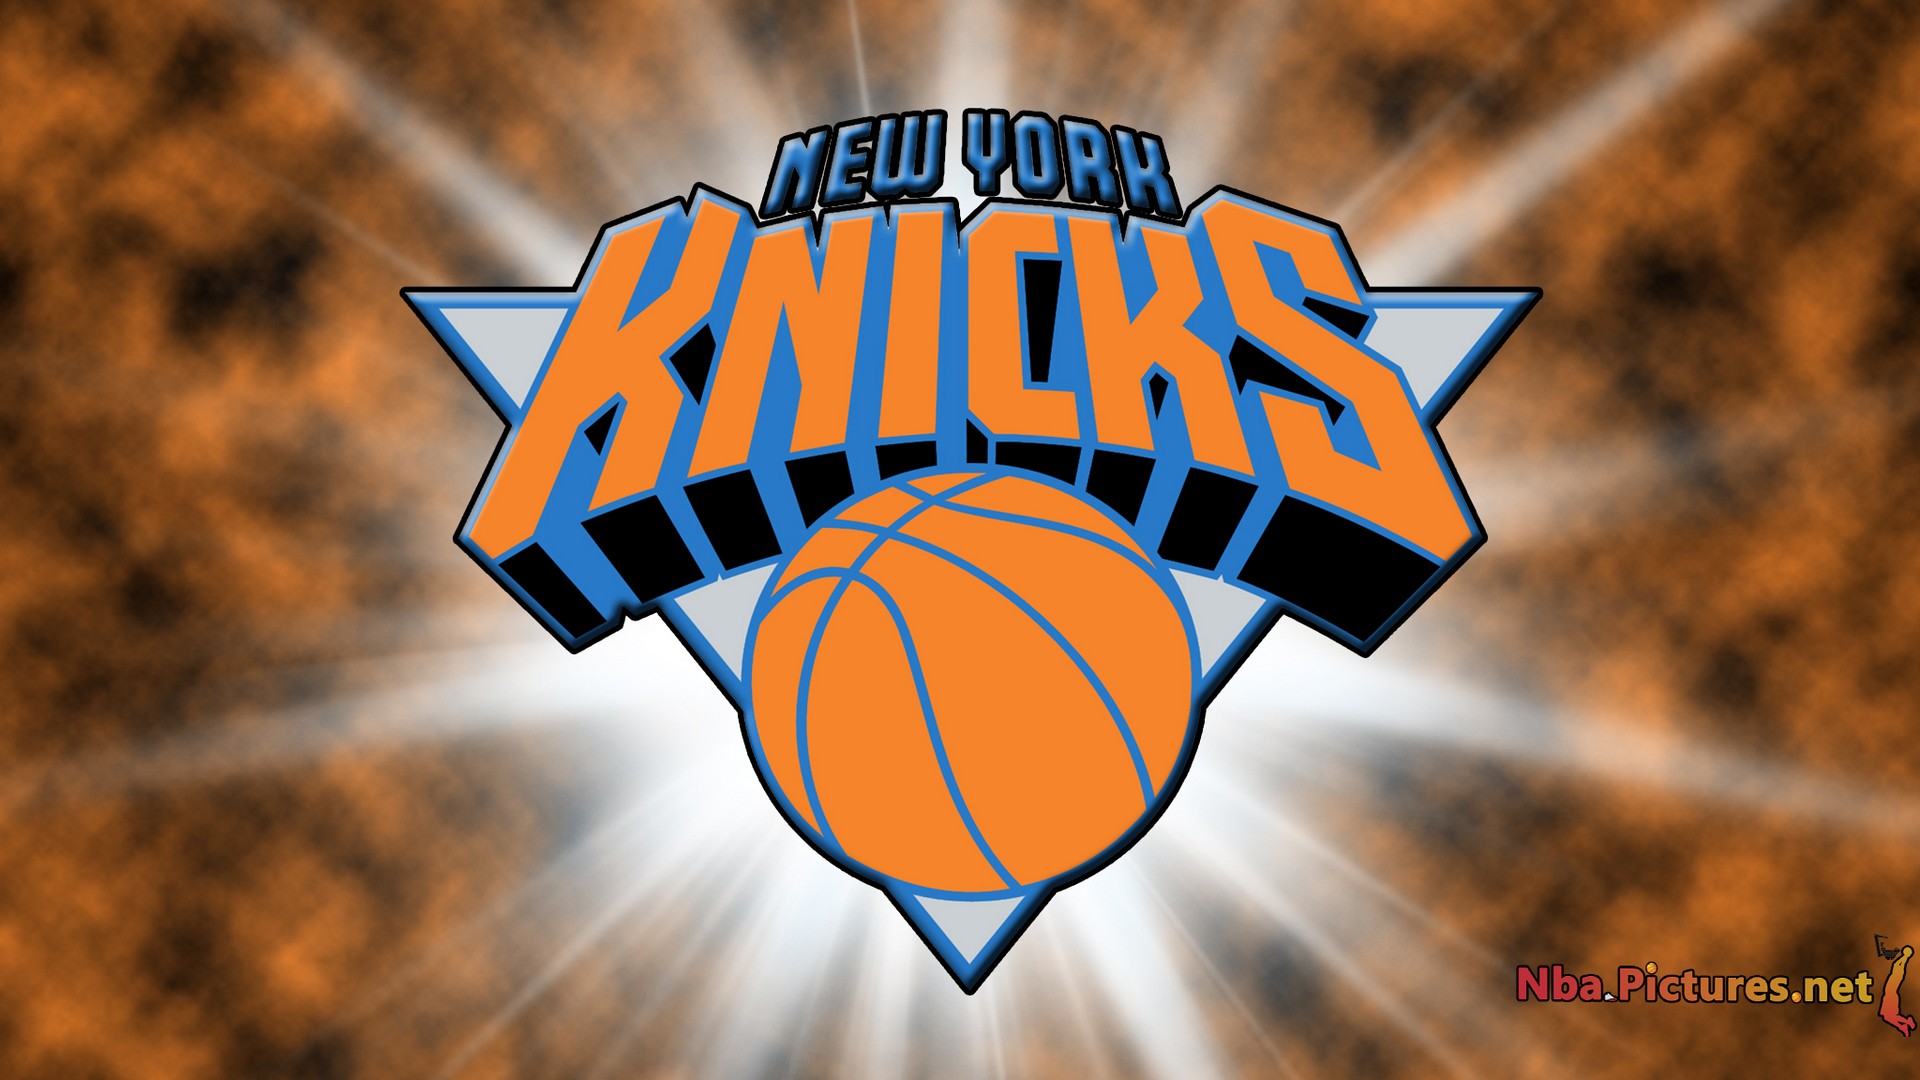 HD Backgrounds Knicks with image dimensions 1920x1080 pixel. You can make this wallpaper for your Desktop Computer Backgrounds, Windows or Mac Screensavers, iPhone Lock screen, Tablet or Android and another Mobile Phone device